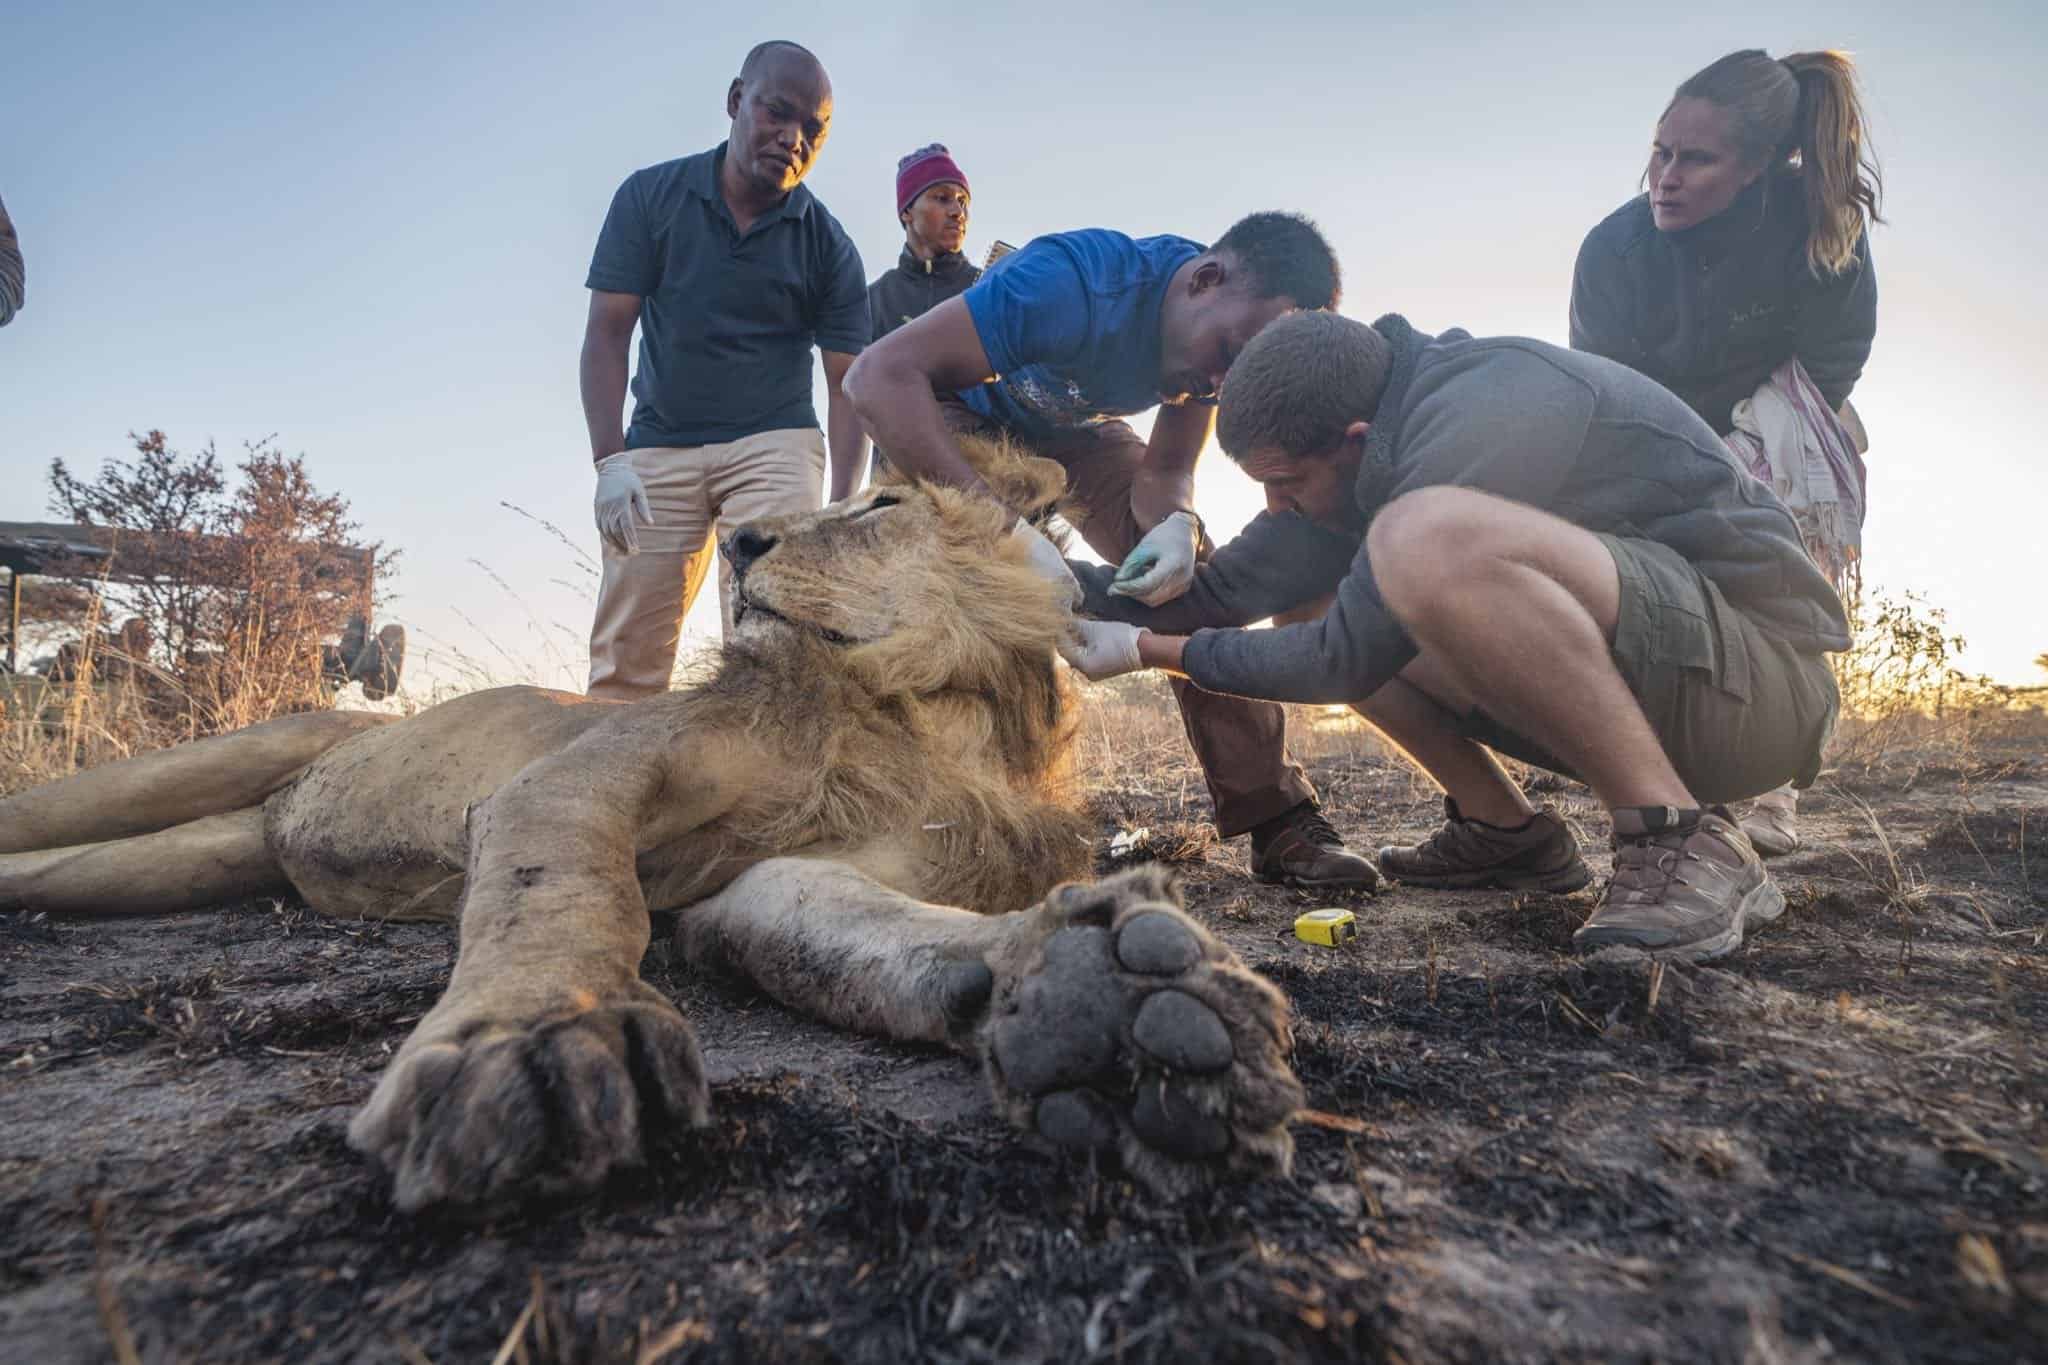 Team of researchers check tag on lion.